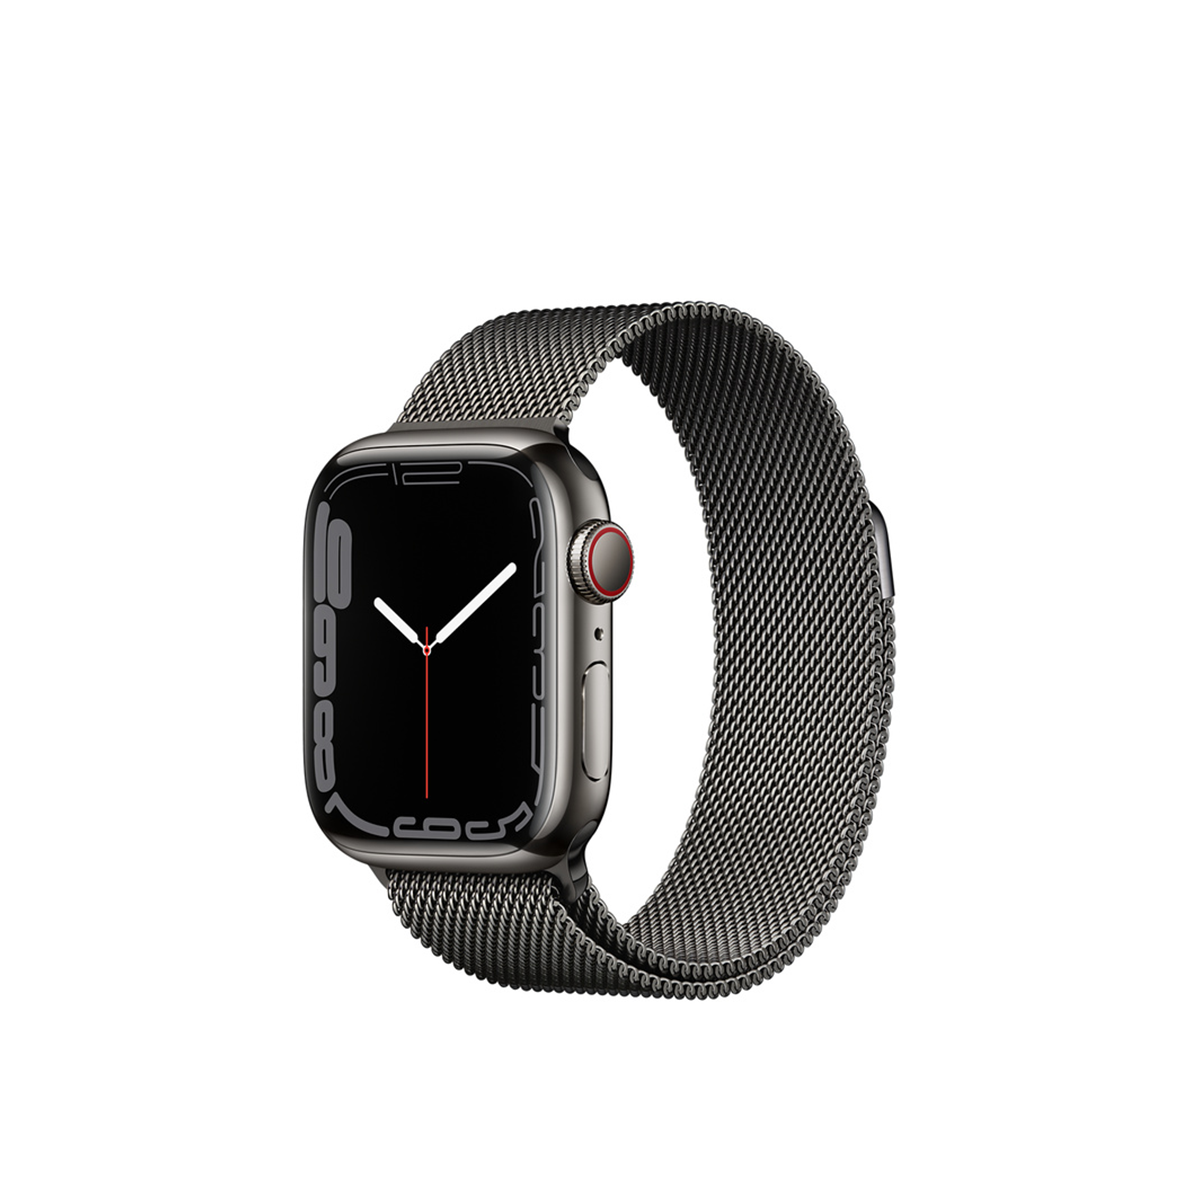  Apple Watch Series 7 GPS + Cellular, Graphite Stainless Steel Case with Milanese Loop 